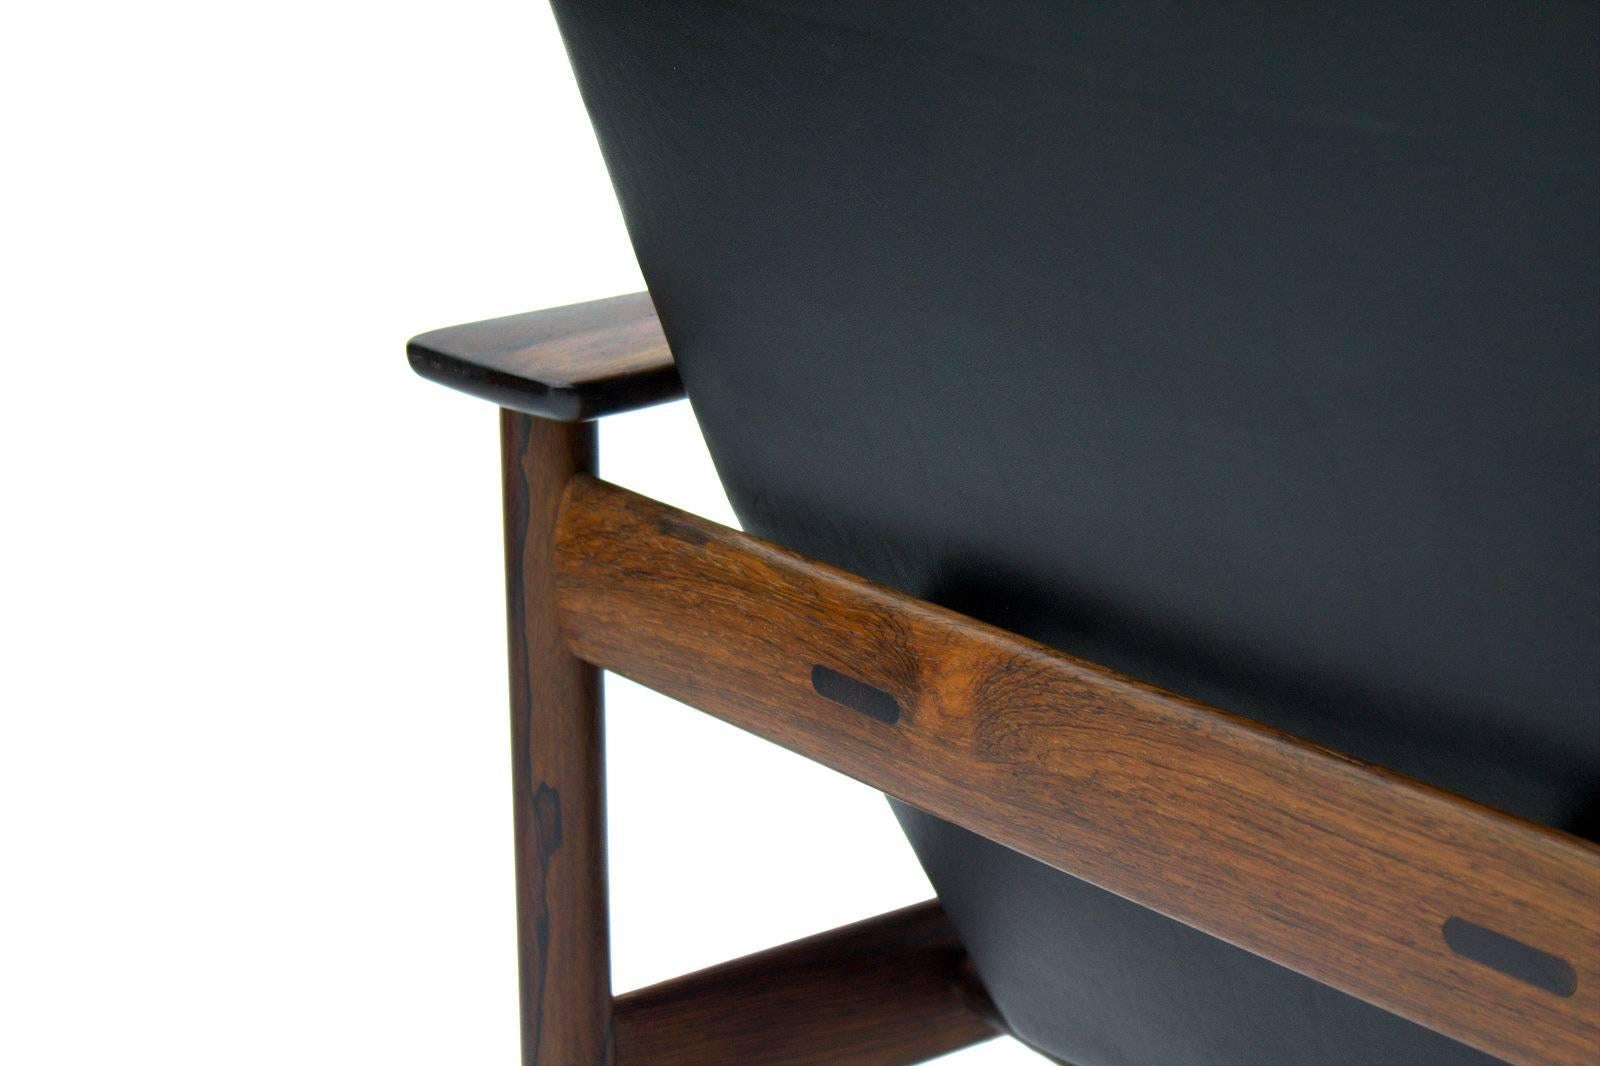 Pair of Rosewood and Leather Lounge Chairs by Sven Ivar Dysthe for Dokka 1